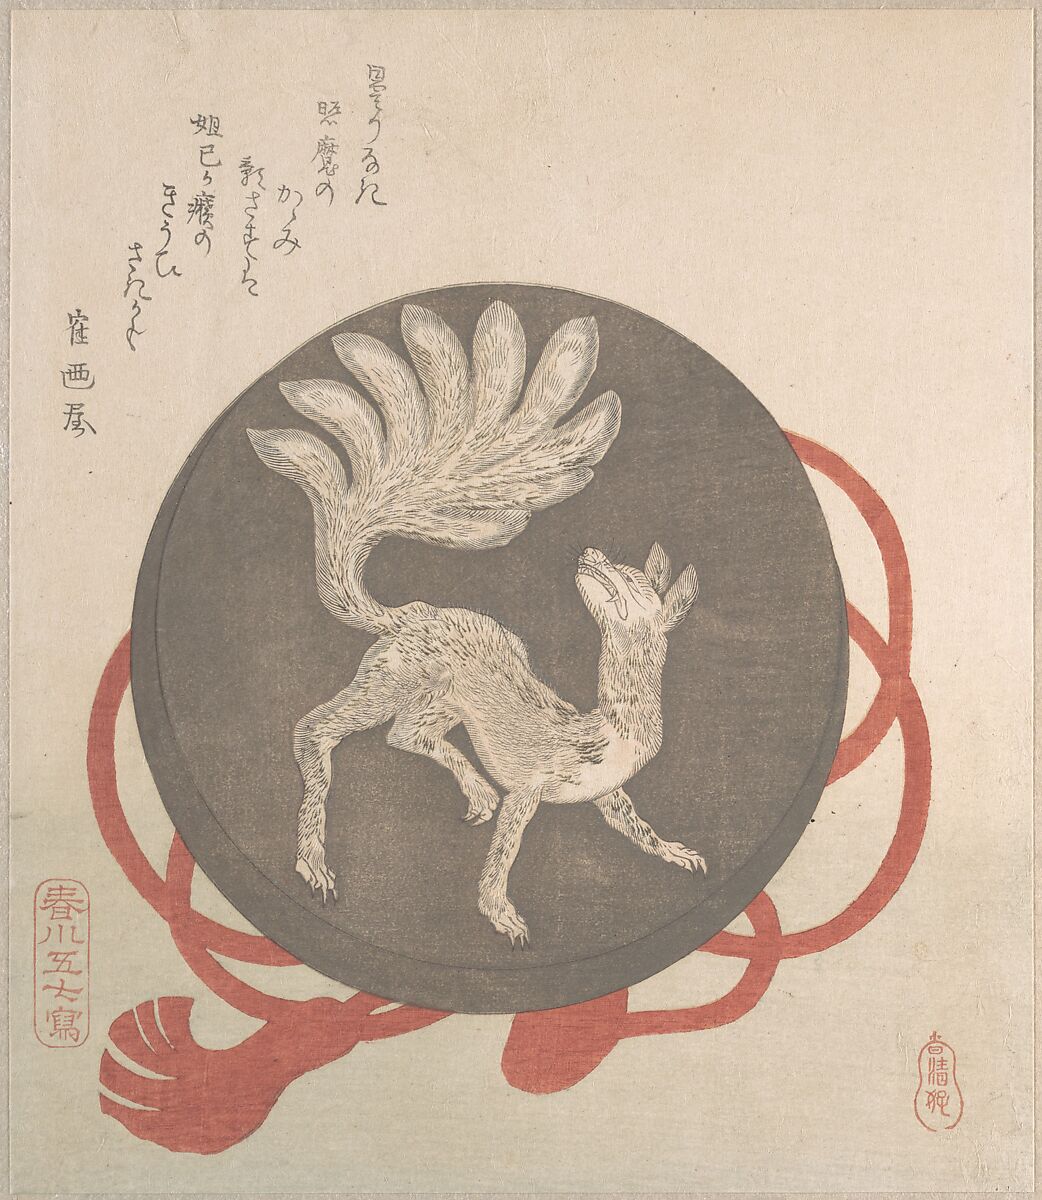 Mirror With the Design of a Nine-Tailed Fox, Harukawa Goshichi (Japanese, 1776–1831), Woodblock print (surimono); ink and color on paper, Japan 